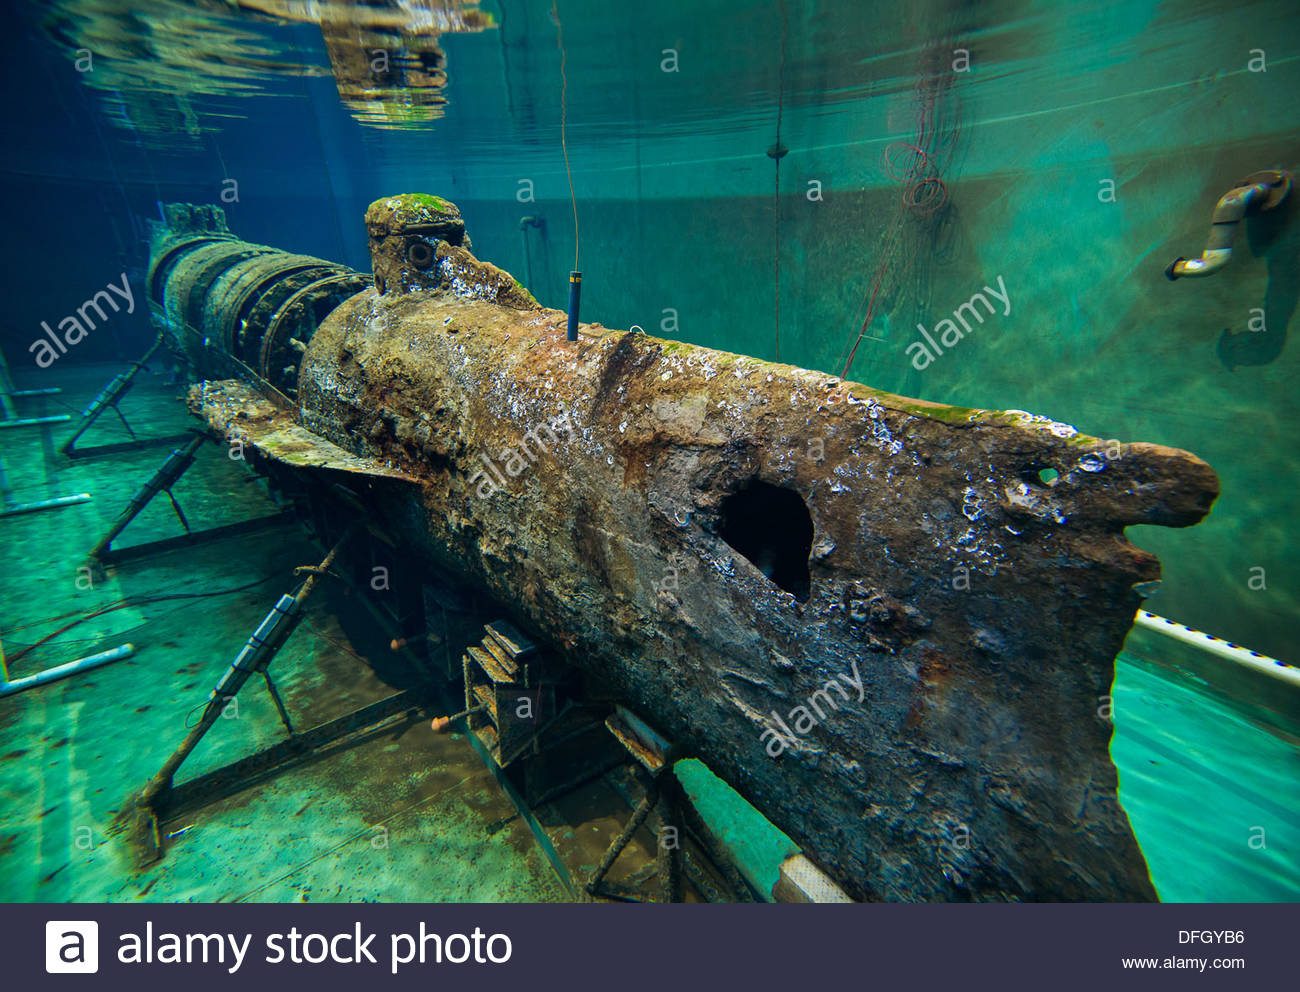 m%2Fcomp%2FDFGYB6%2Fthe-hl-hunley-a-confederate-civil-war-era-submarine-sits-in-its-water-DFGYB6.jpg